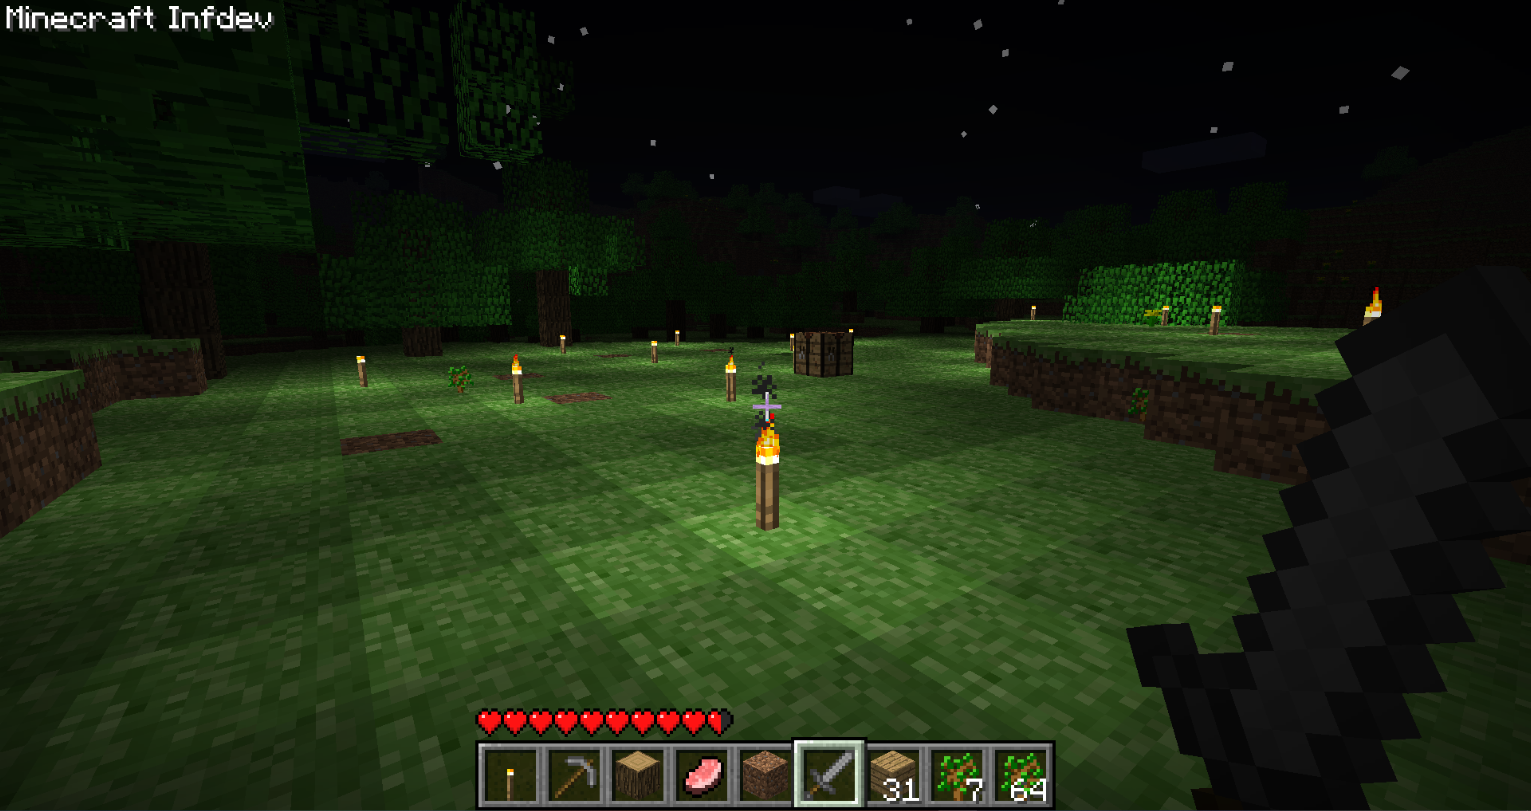 Lighting requires an awful lot of torches